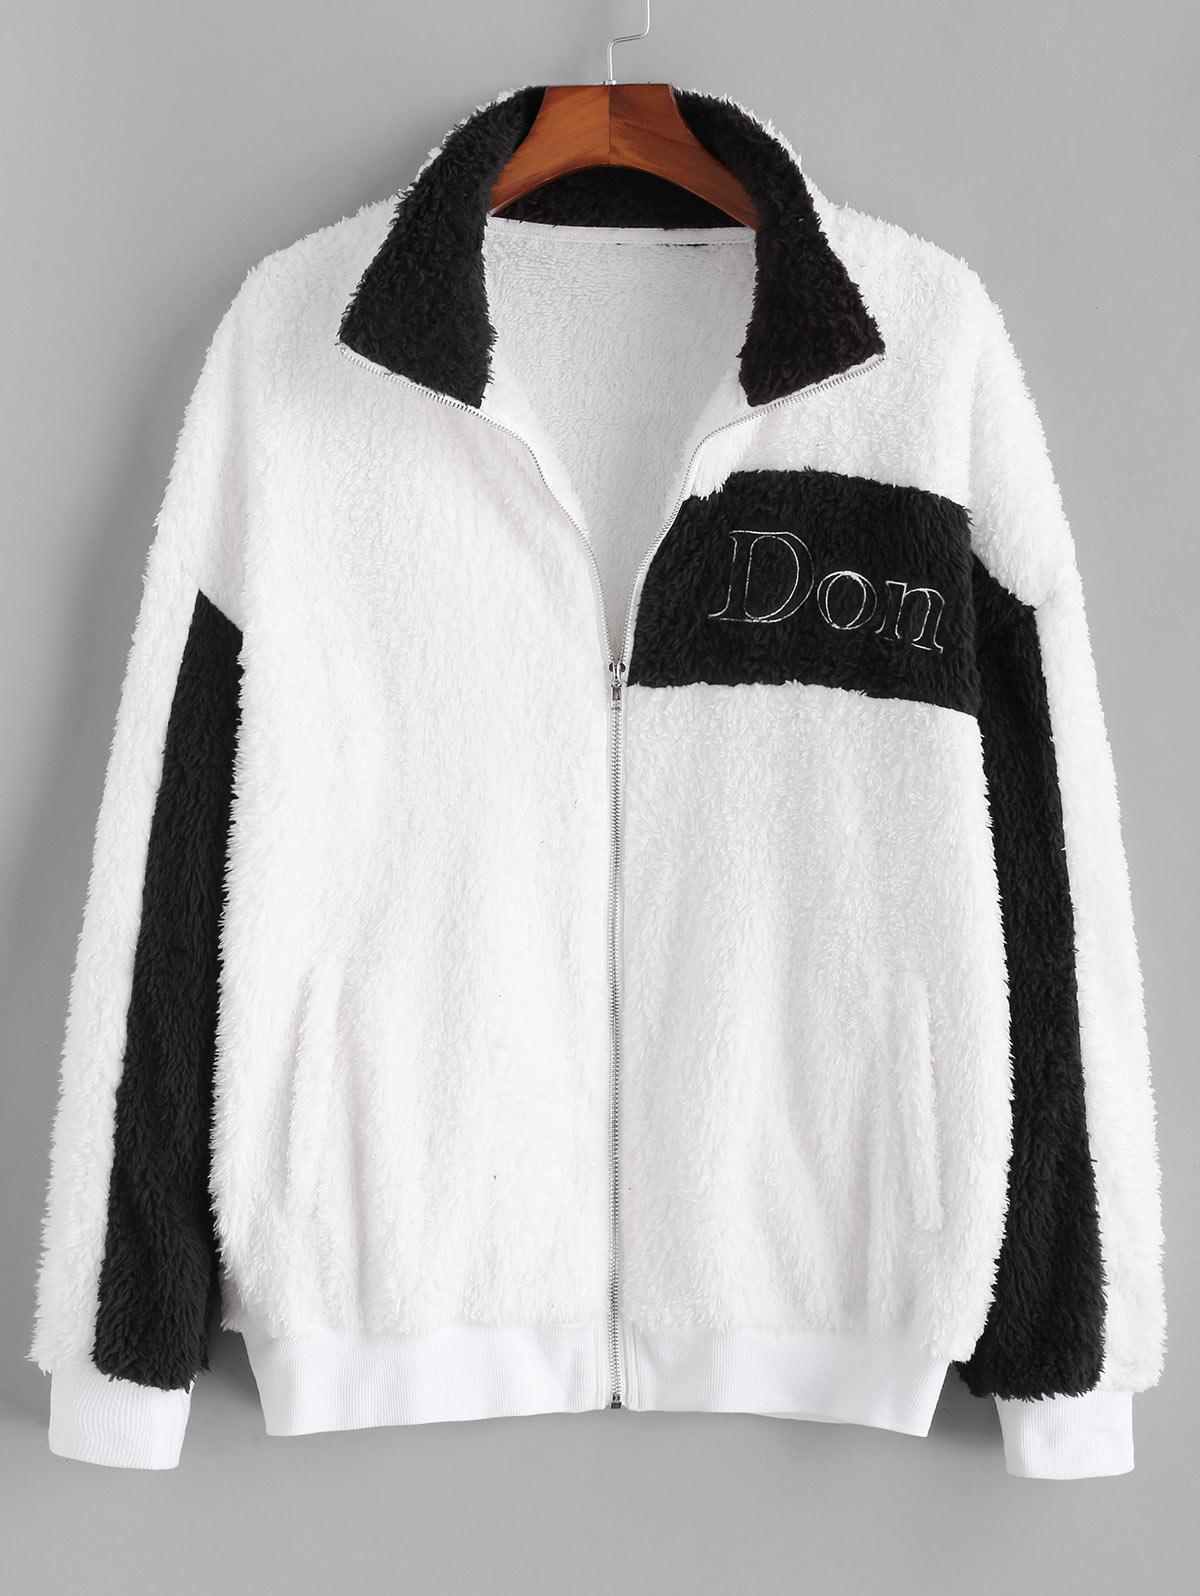 Don't Embroidery Two Tone Fluffy Jacket Xl White